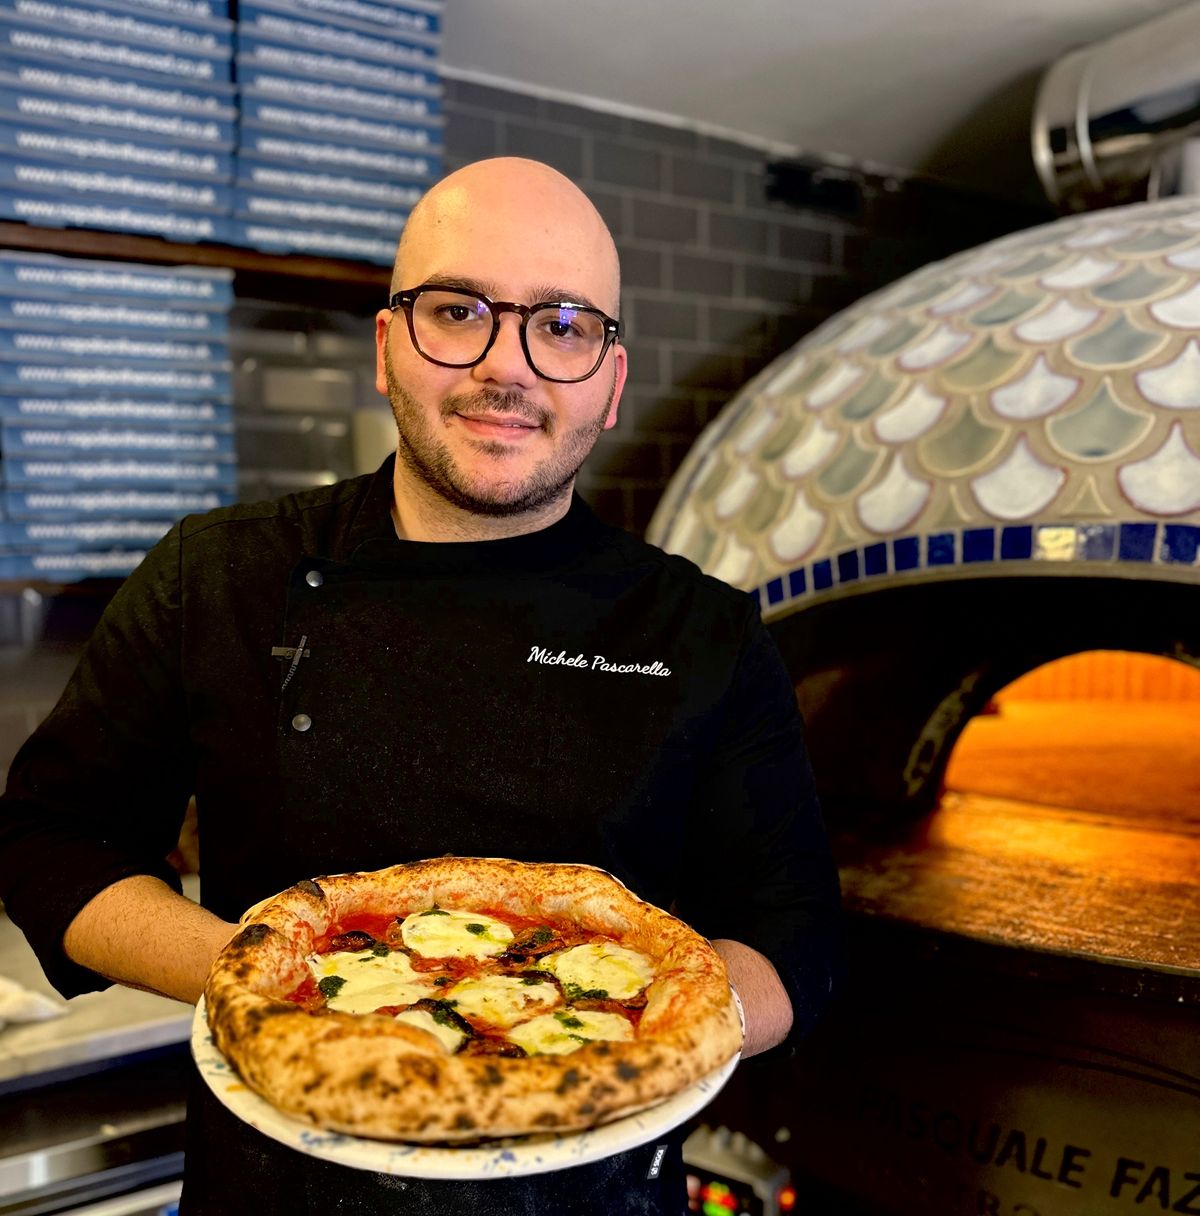 Masters of Marriott Bonvoy and Culinary Culture debut Chef Michele Pascarella, The World’s Greatest Pizza Chef at The JW Marriott Goa